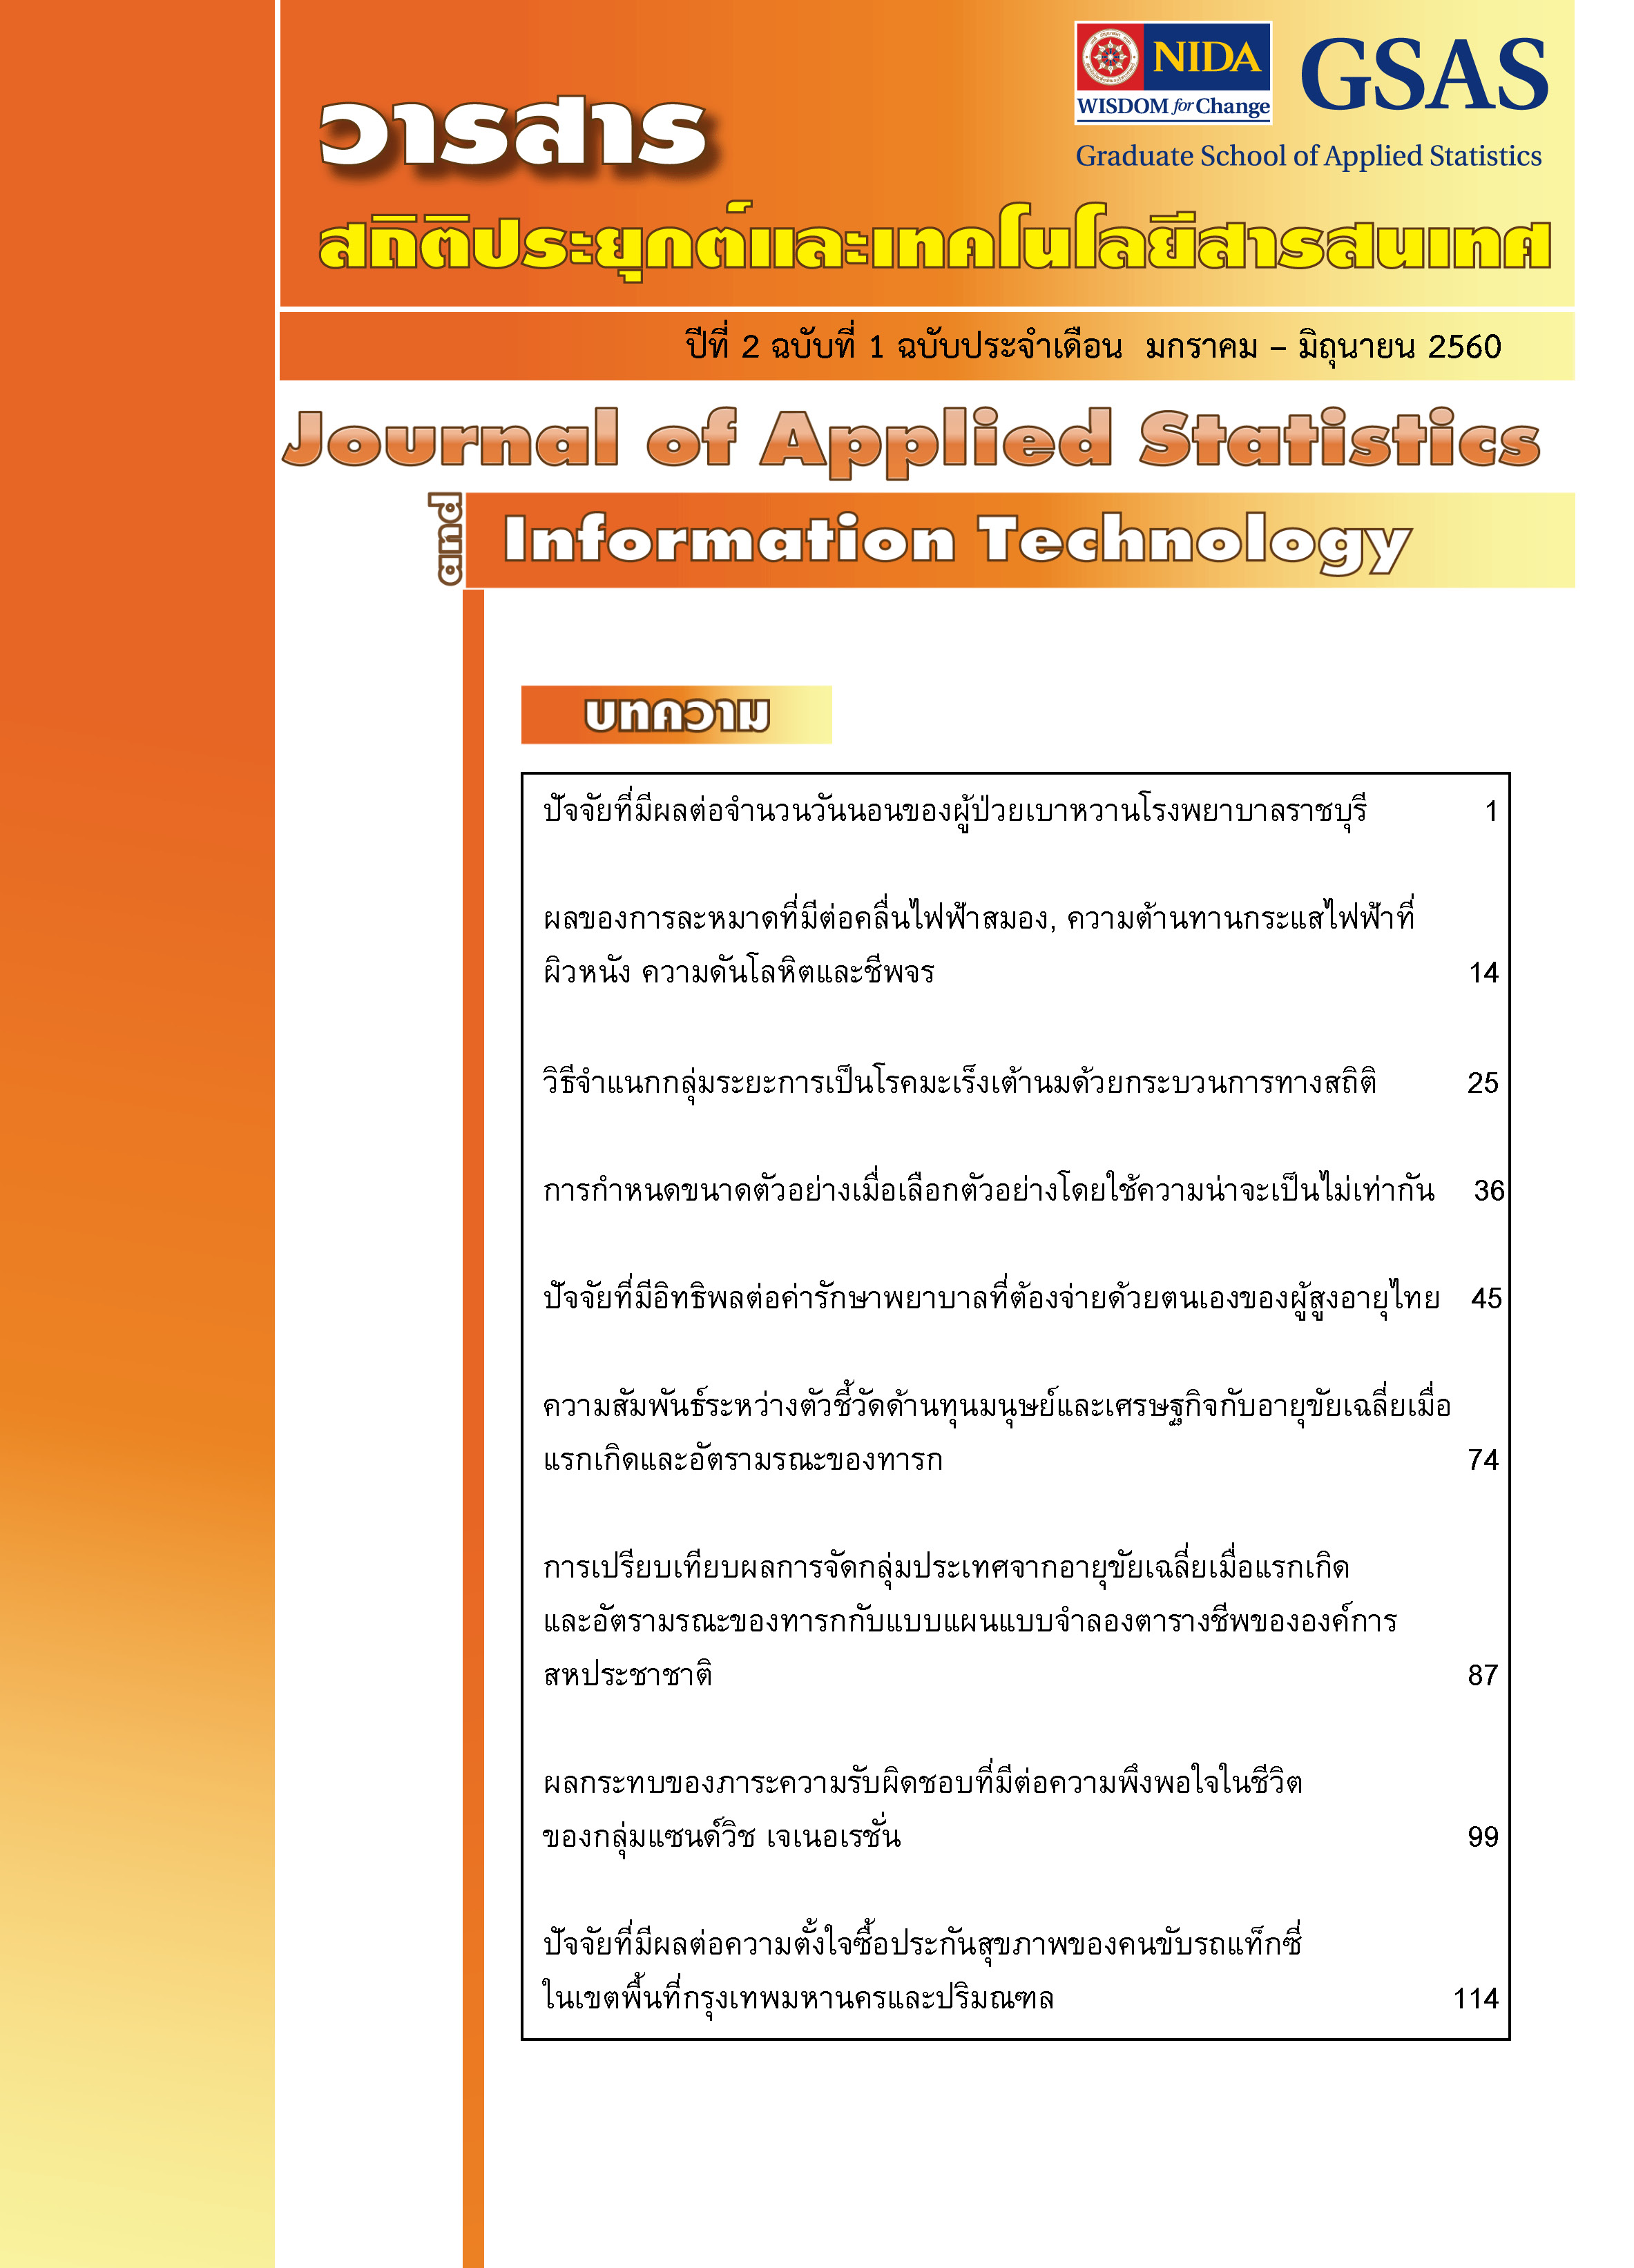 					View Vol. 2 No. 1 (2017): Journal of Applied Statistics and Information Technology Vol 2 No 1 (January - June 2017)
				